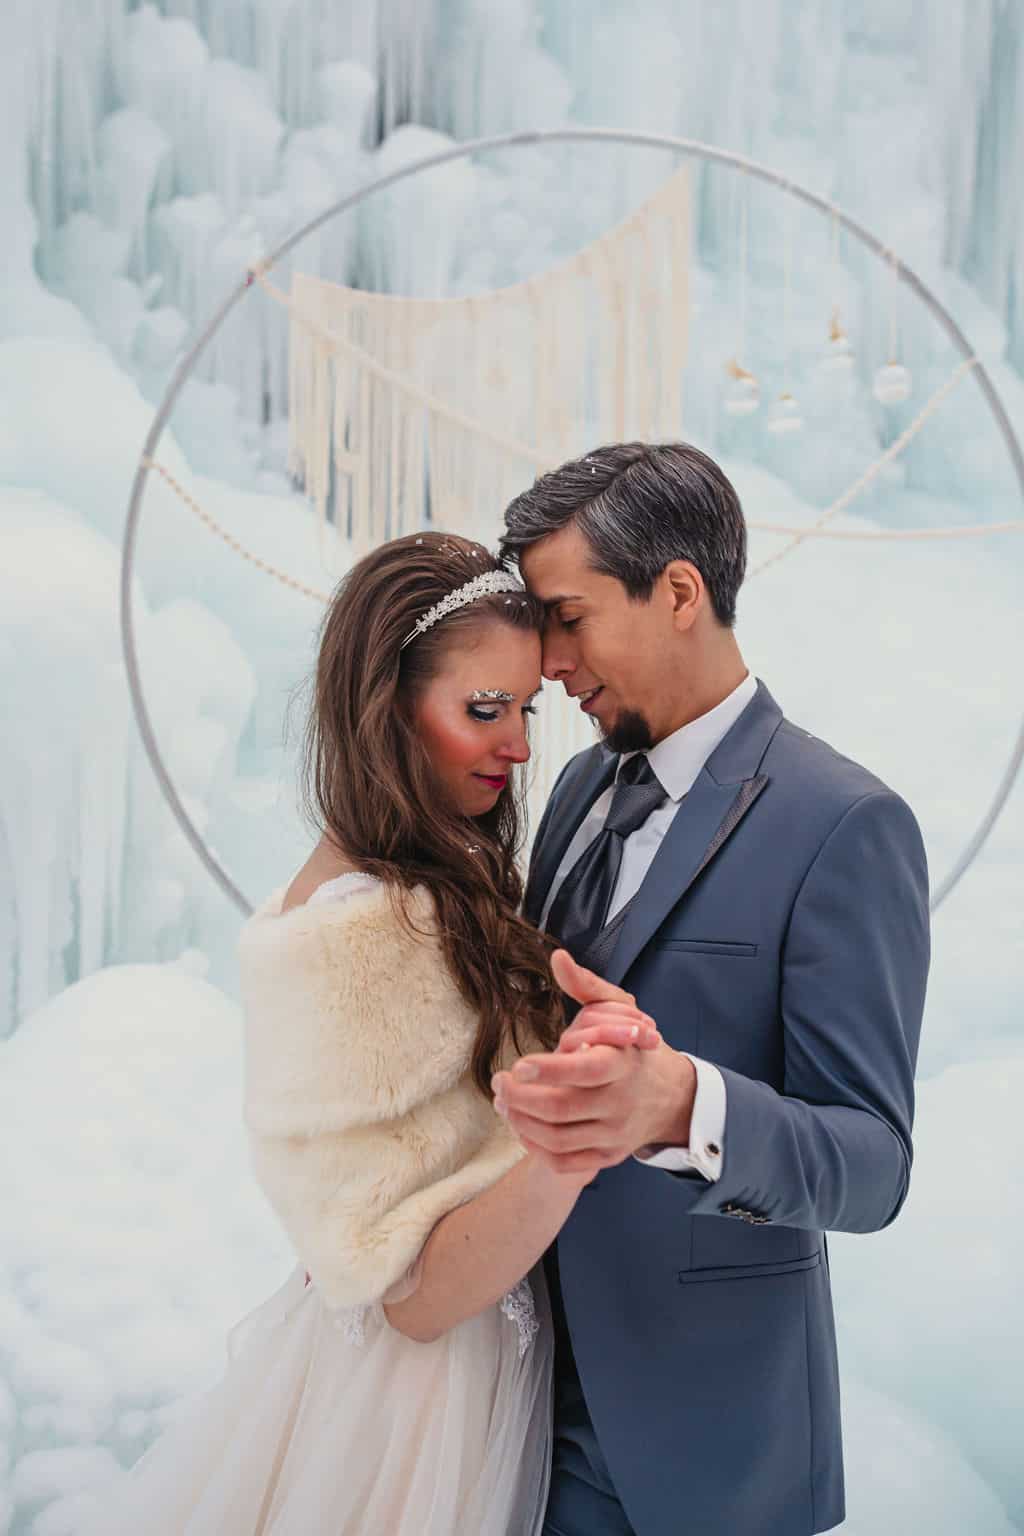 Bride and groom in ice land.